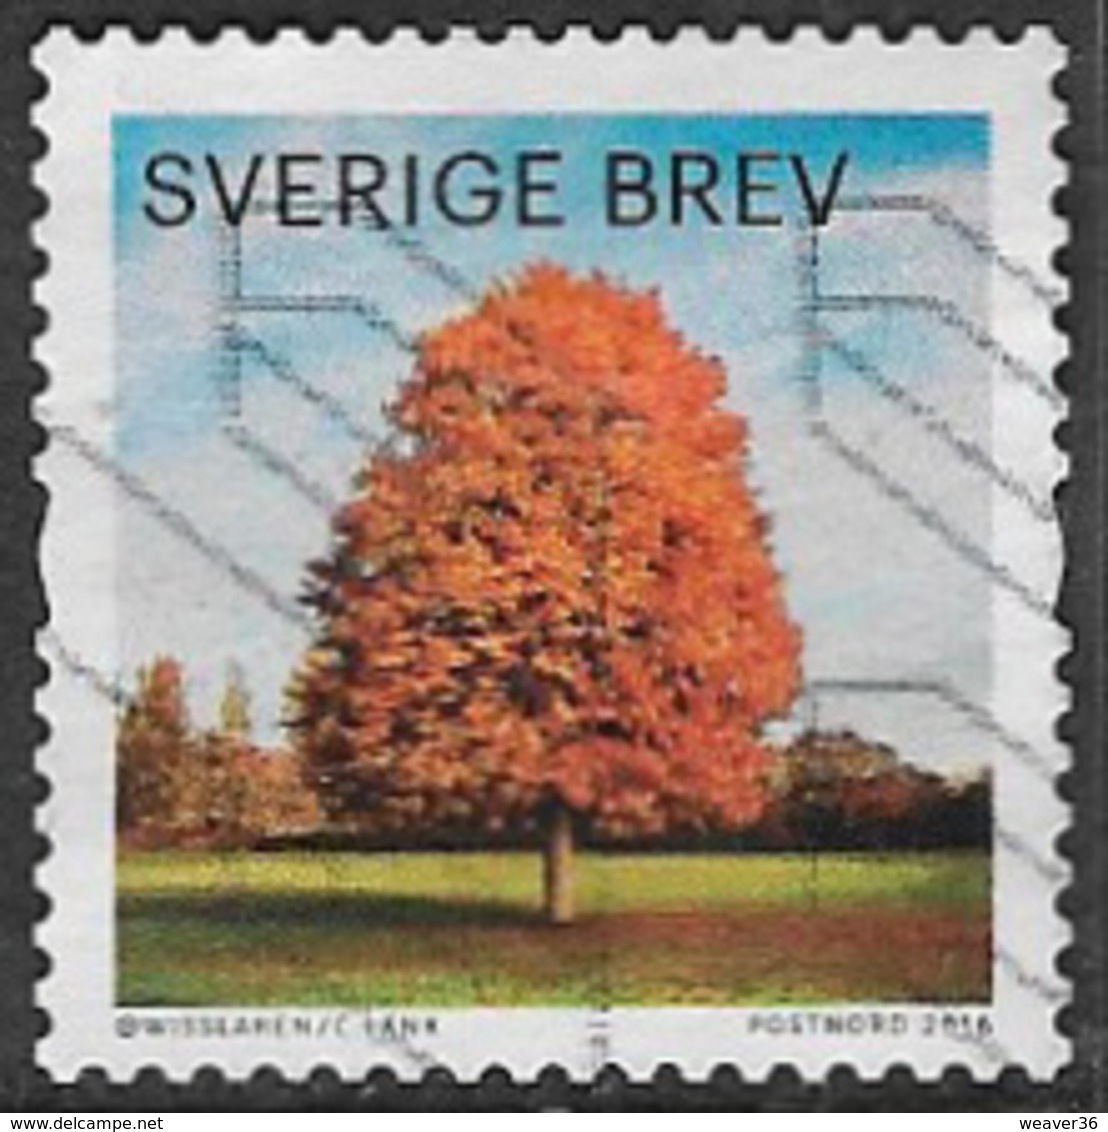 Sweden 2016 Autumn Glow Brev Type 4 Good/fine Used [39/31844/ND] - Used Stamps